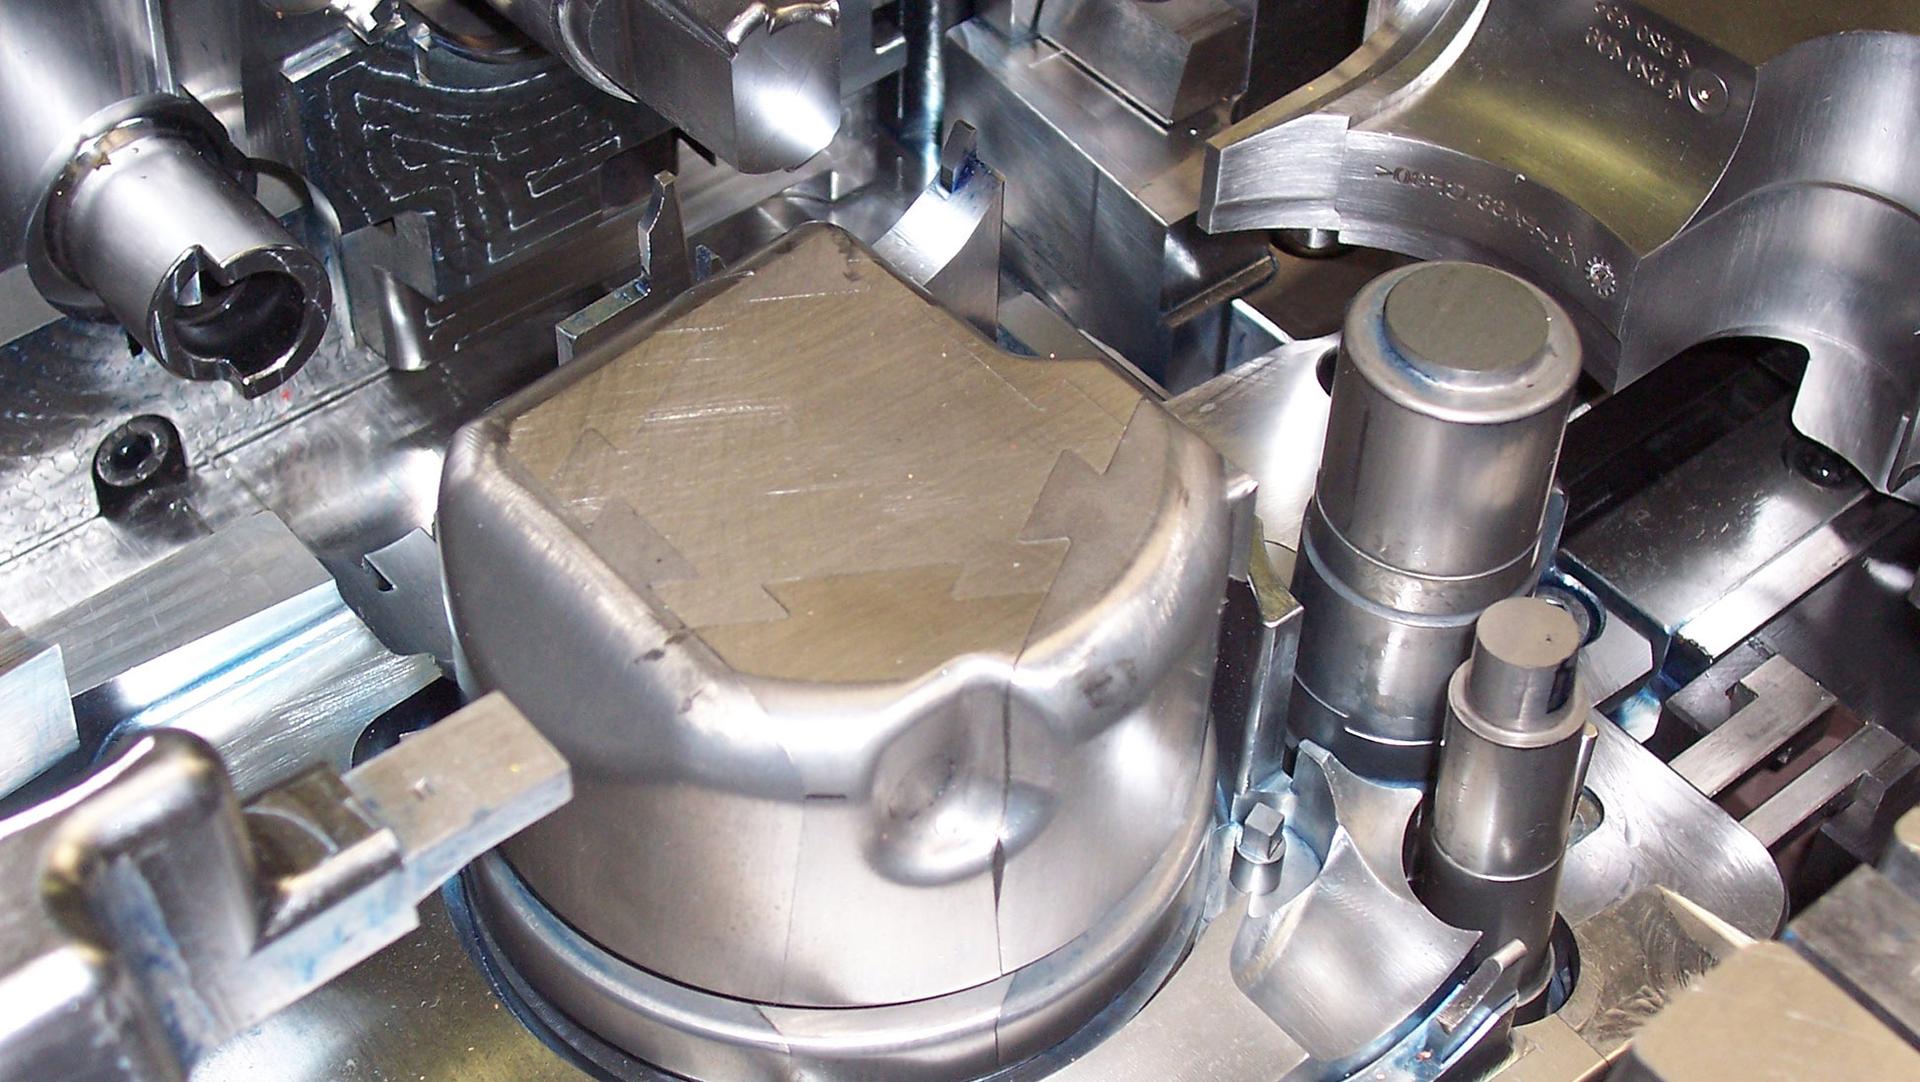 HELLER industry solutions: Tool and mold making